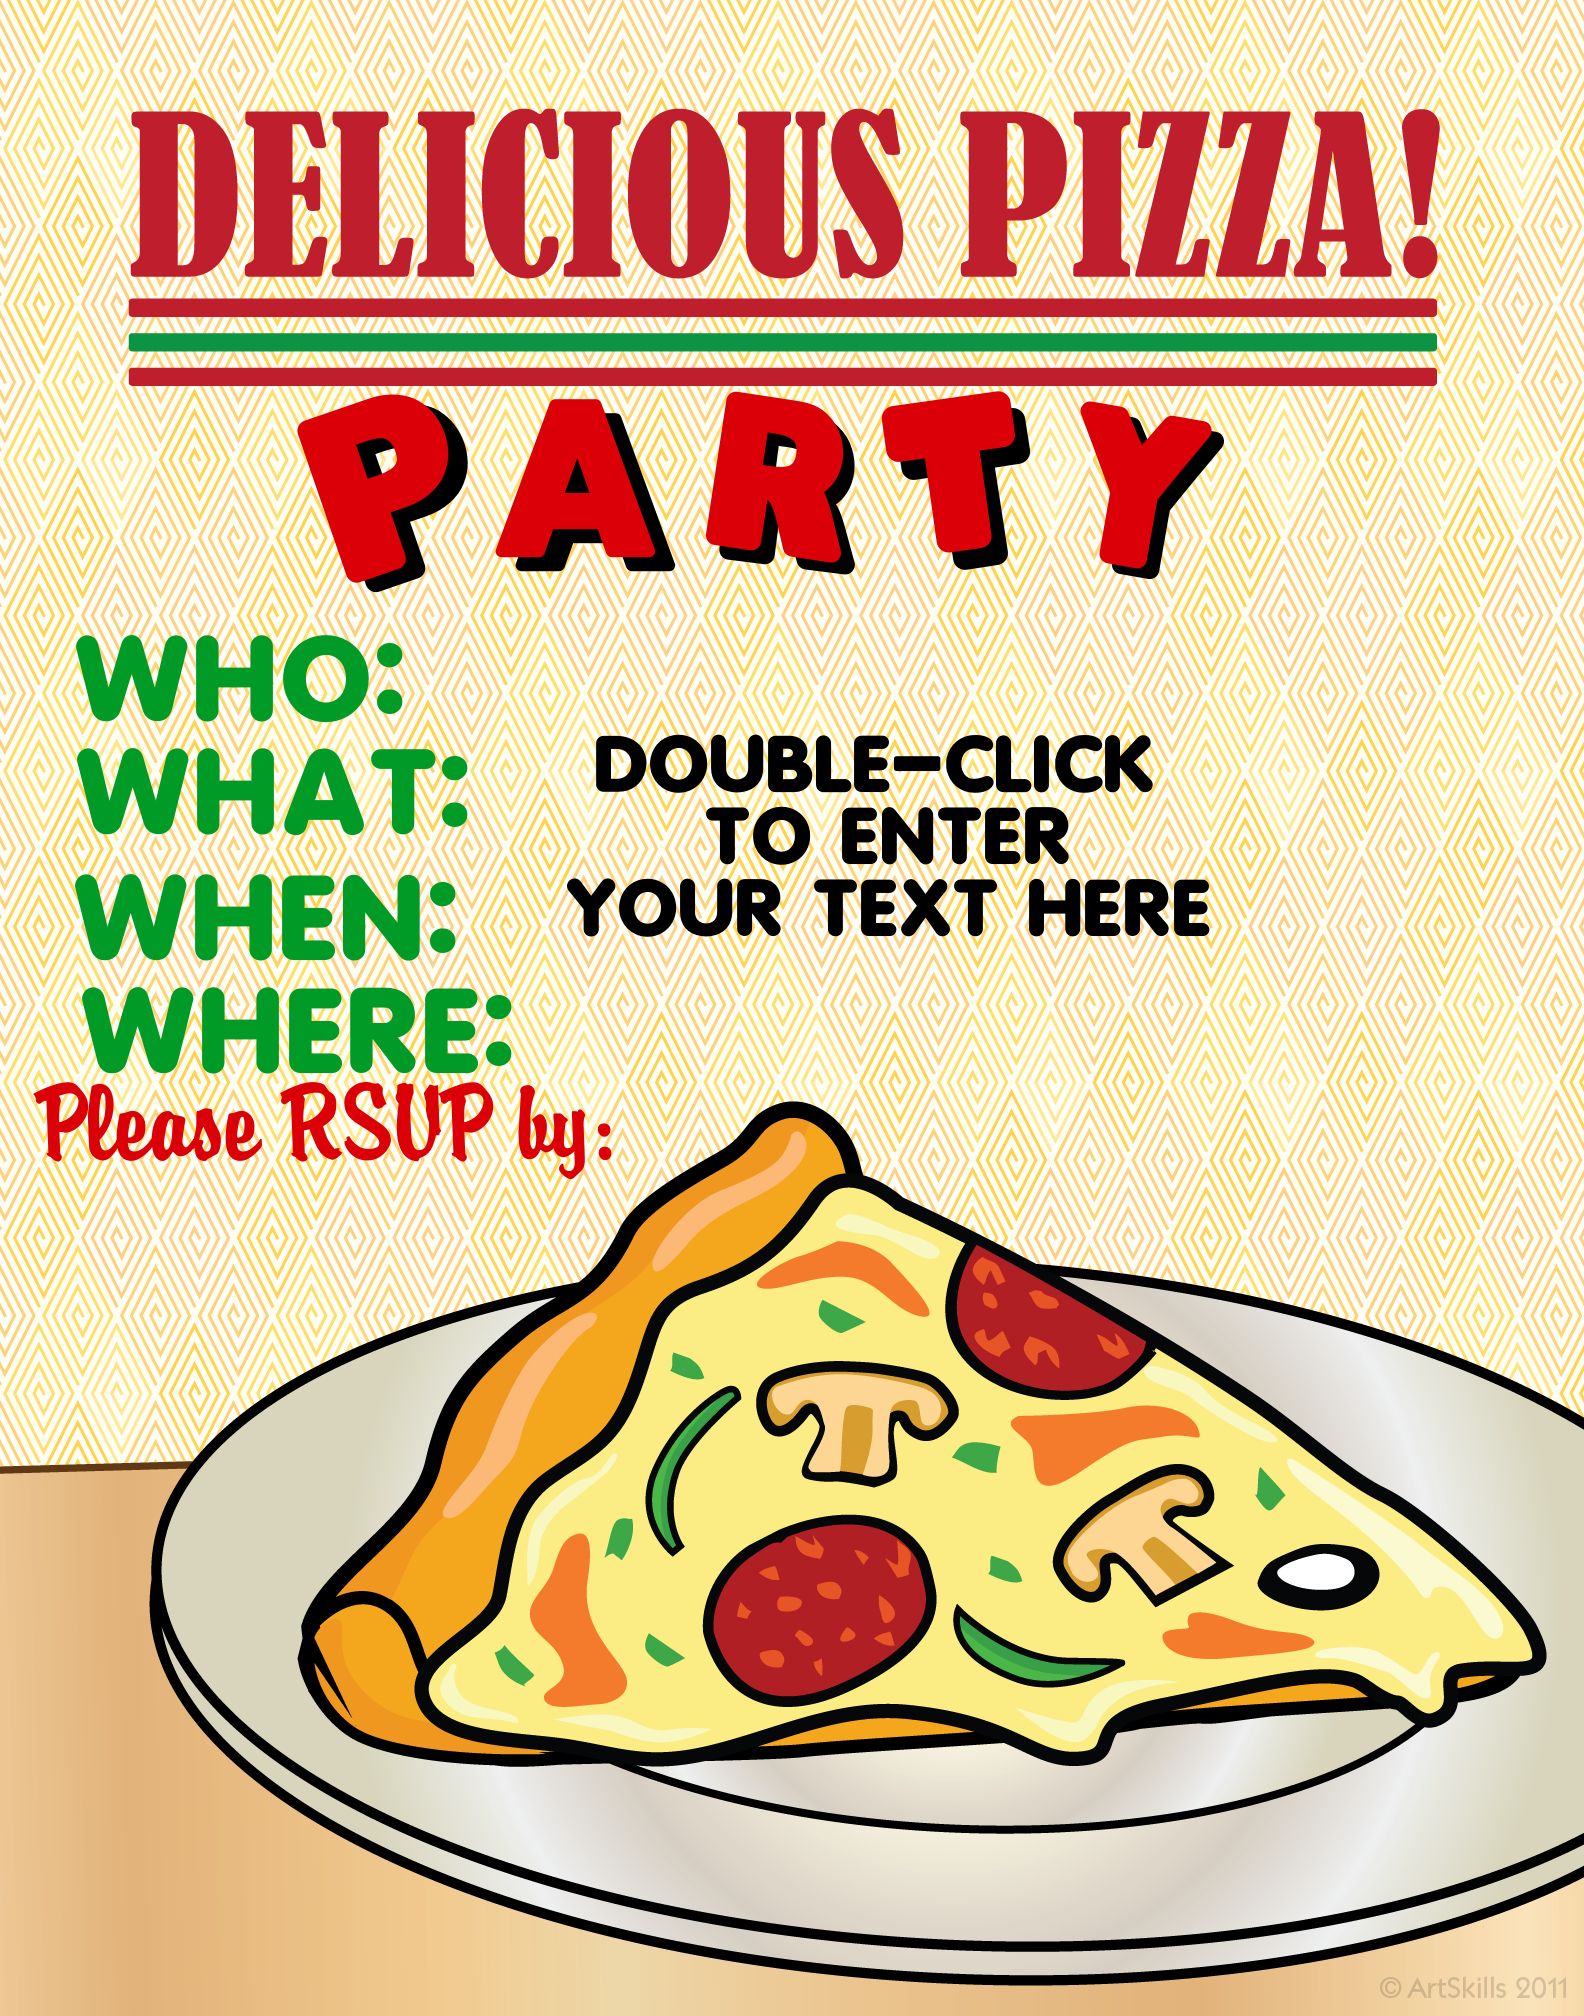 Create A Poster About Pizza Party   Party   Invitation Poster Ideas